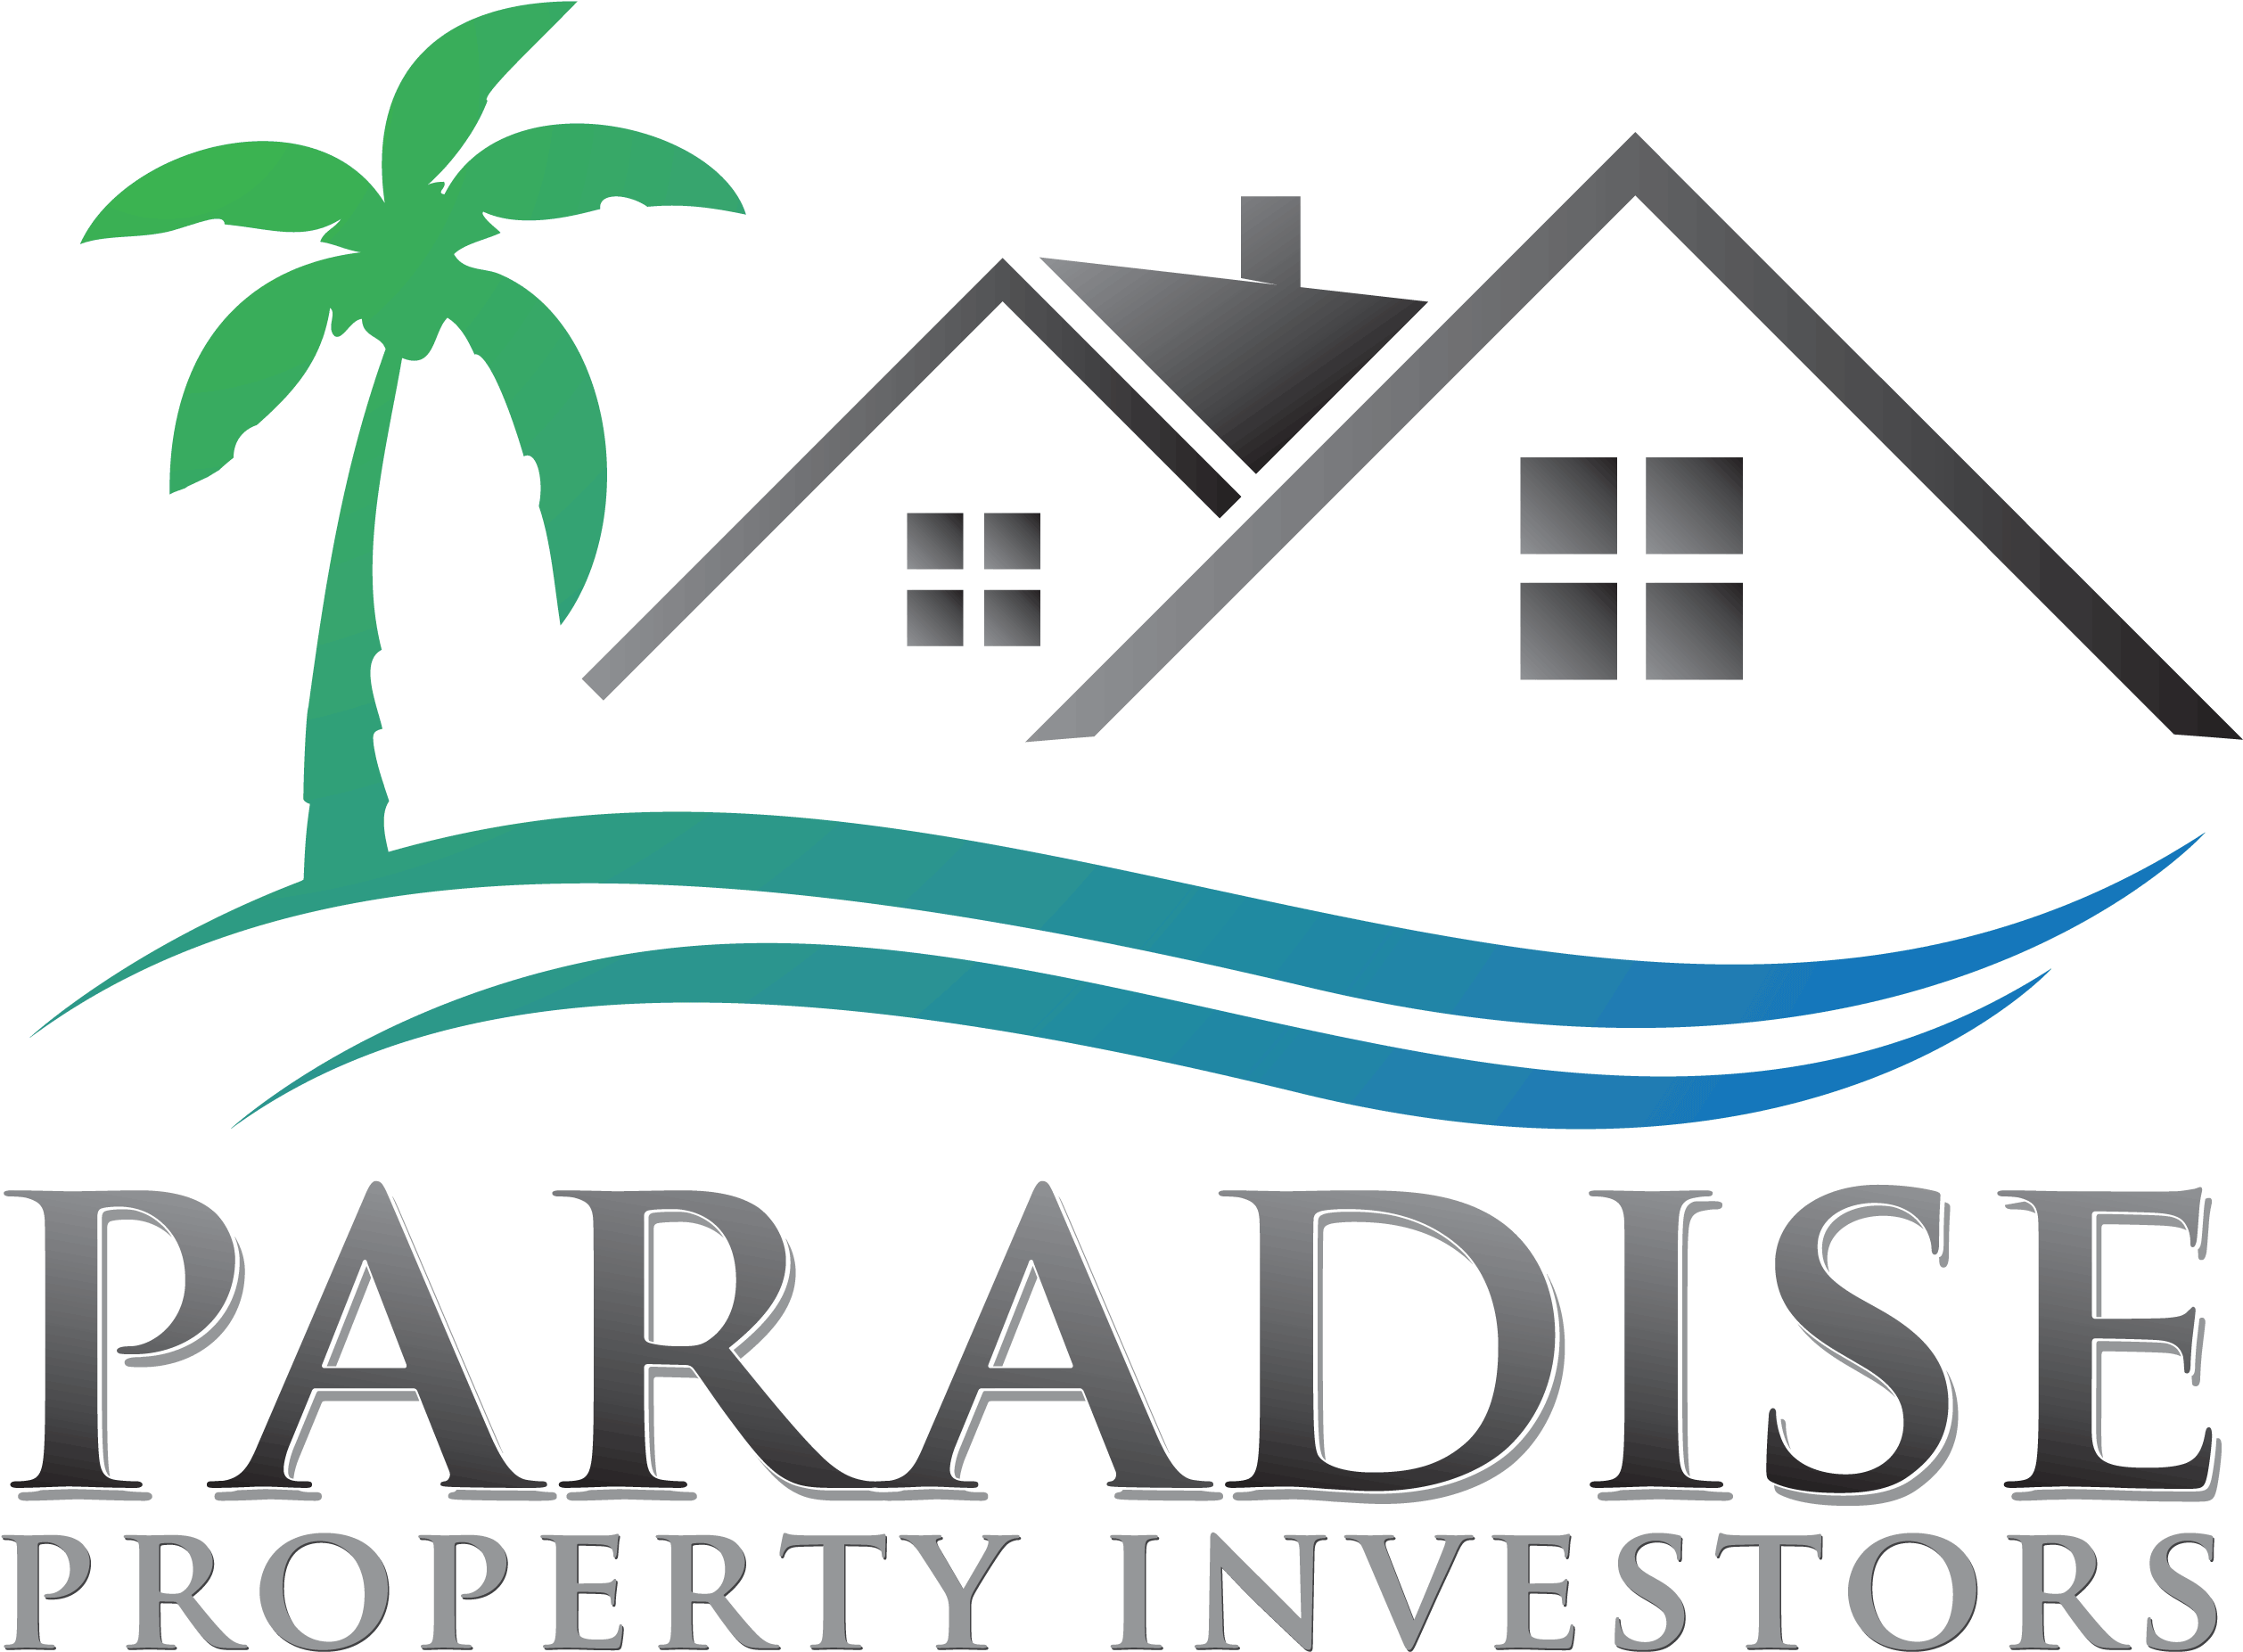 Our Company - Paradise Properties (2520x2010)